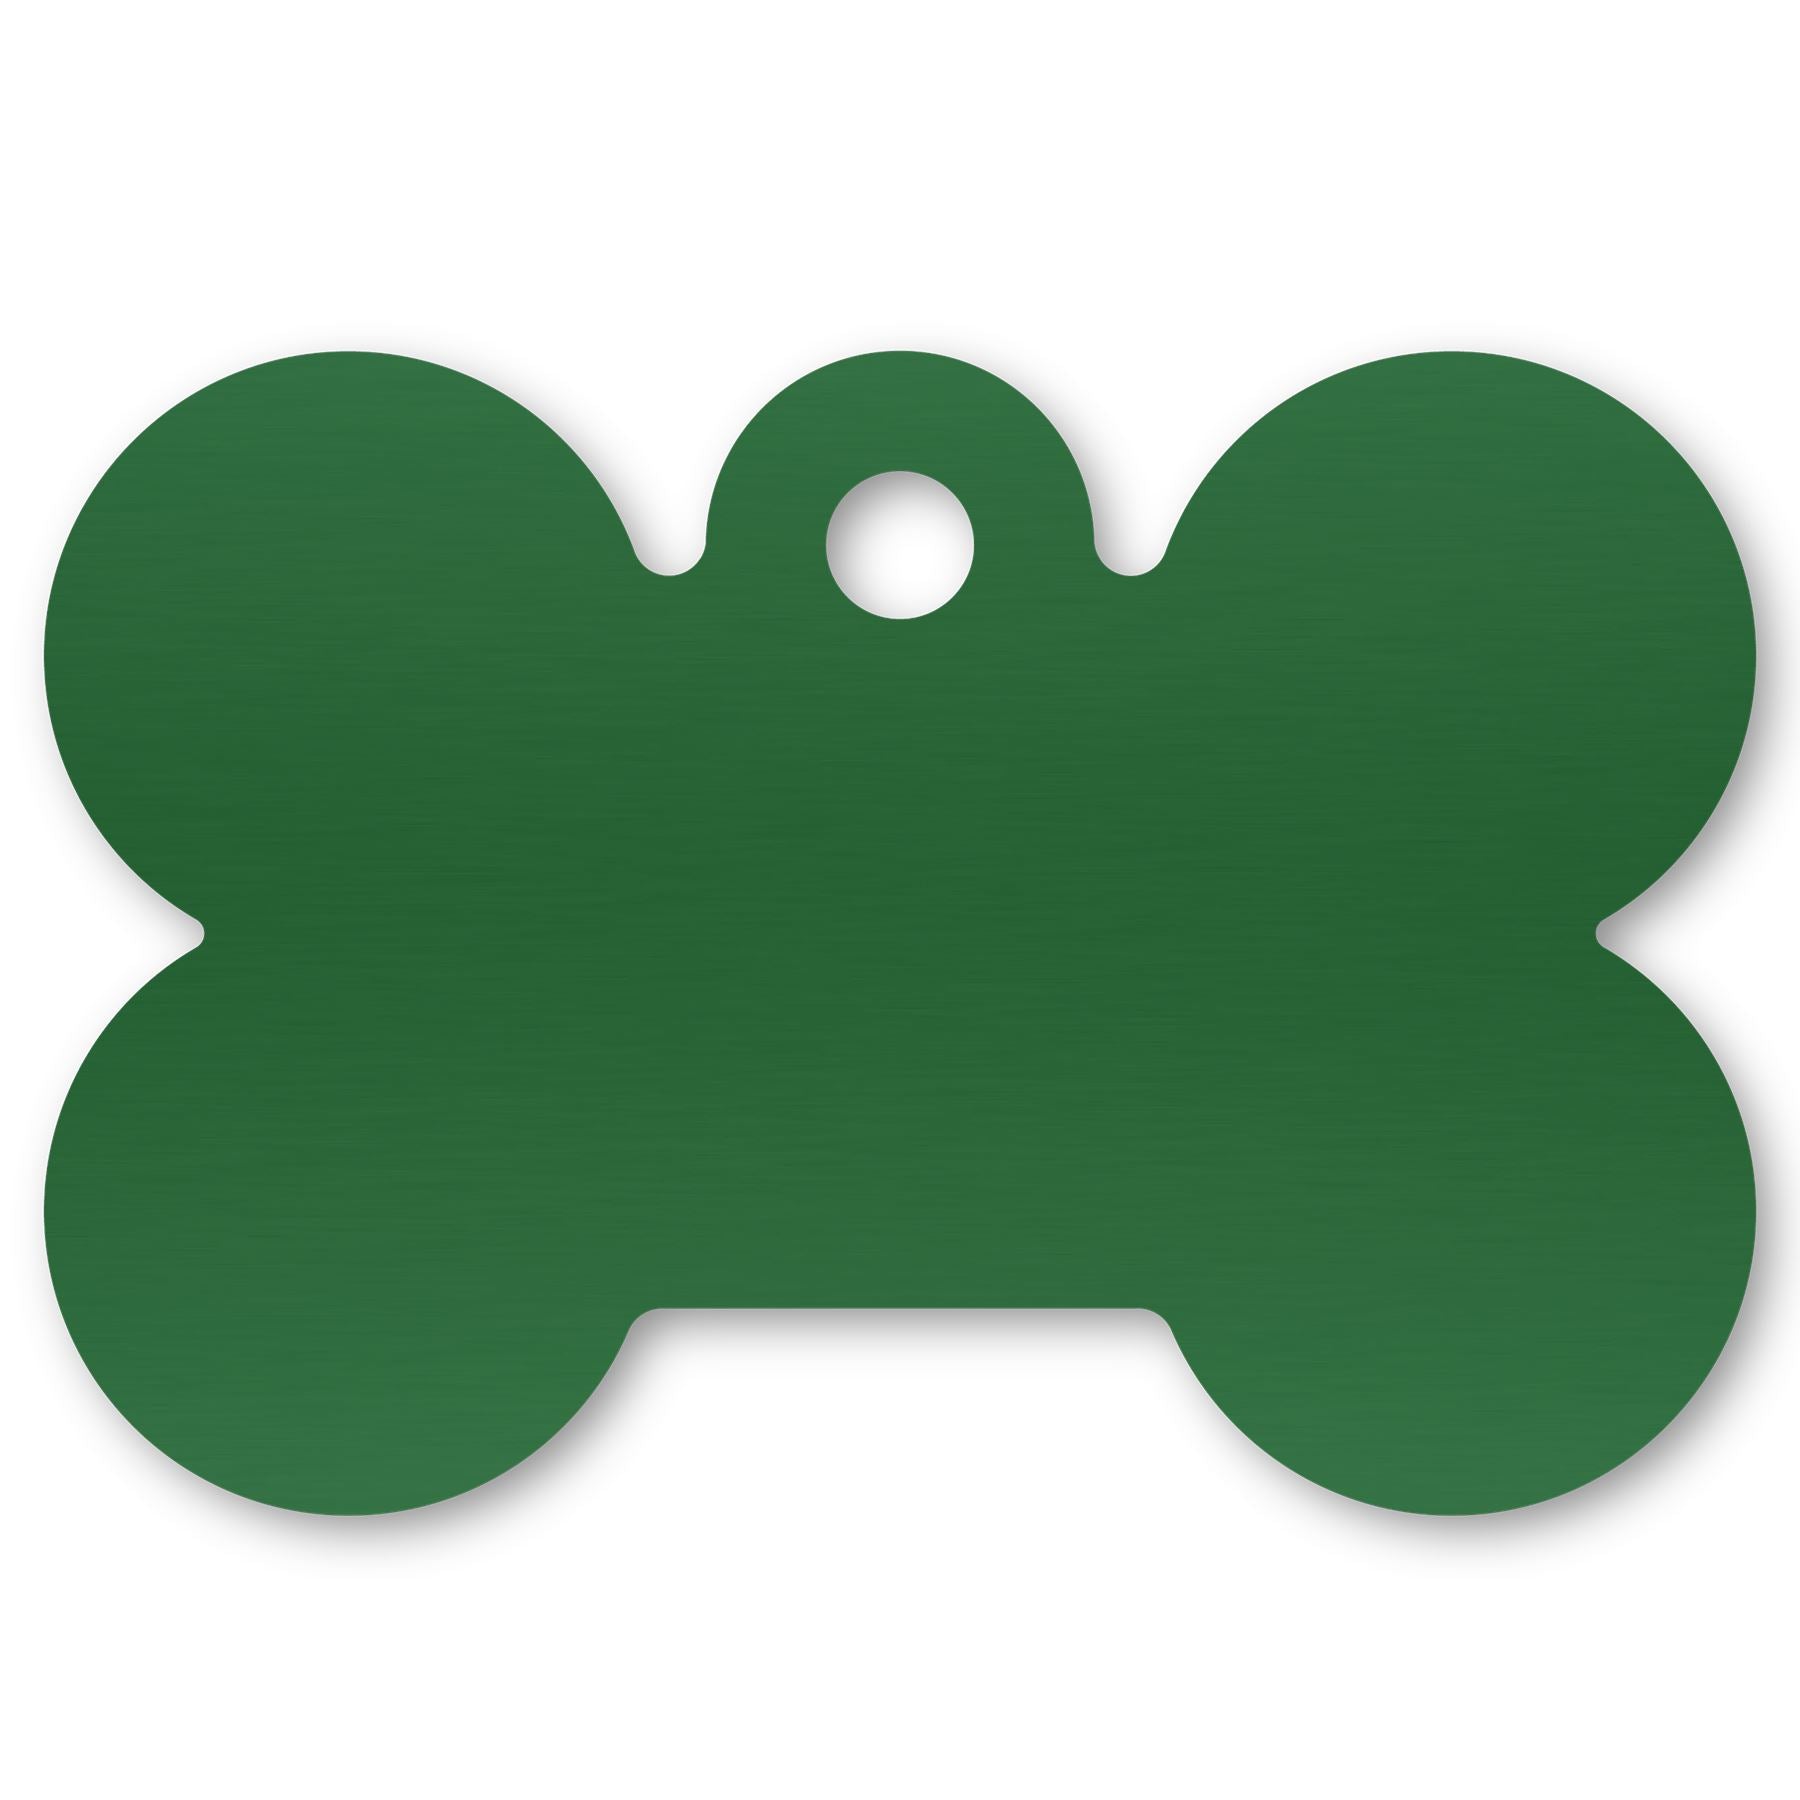 Anodized Aluminum Dog Bone Shaped Tags, 3/4" x 1-1/16" with 3/32" Hole, Laser Engraved Metal Tags Craftworks NW Green 